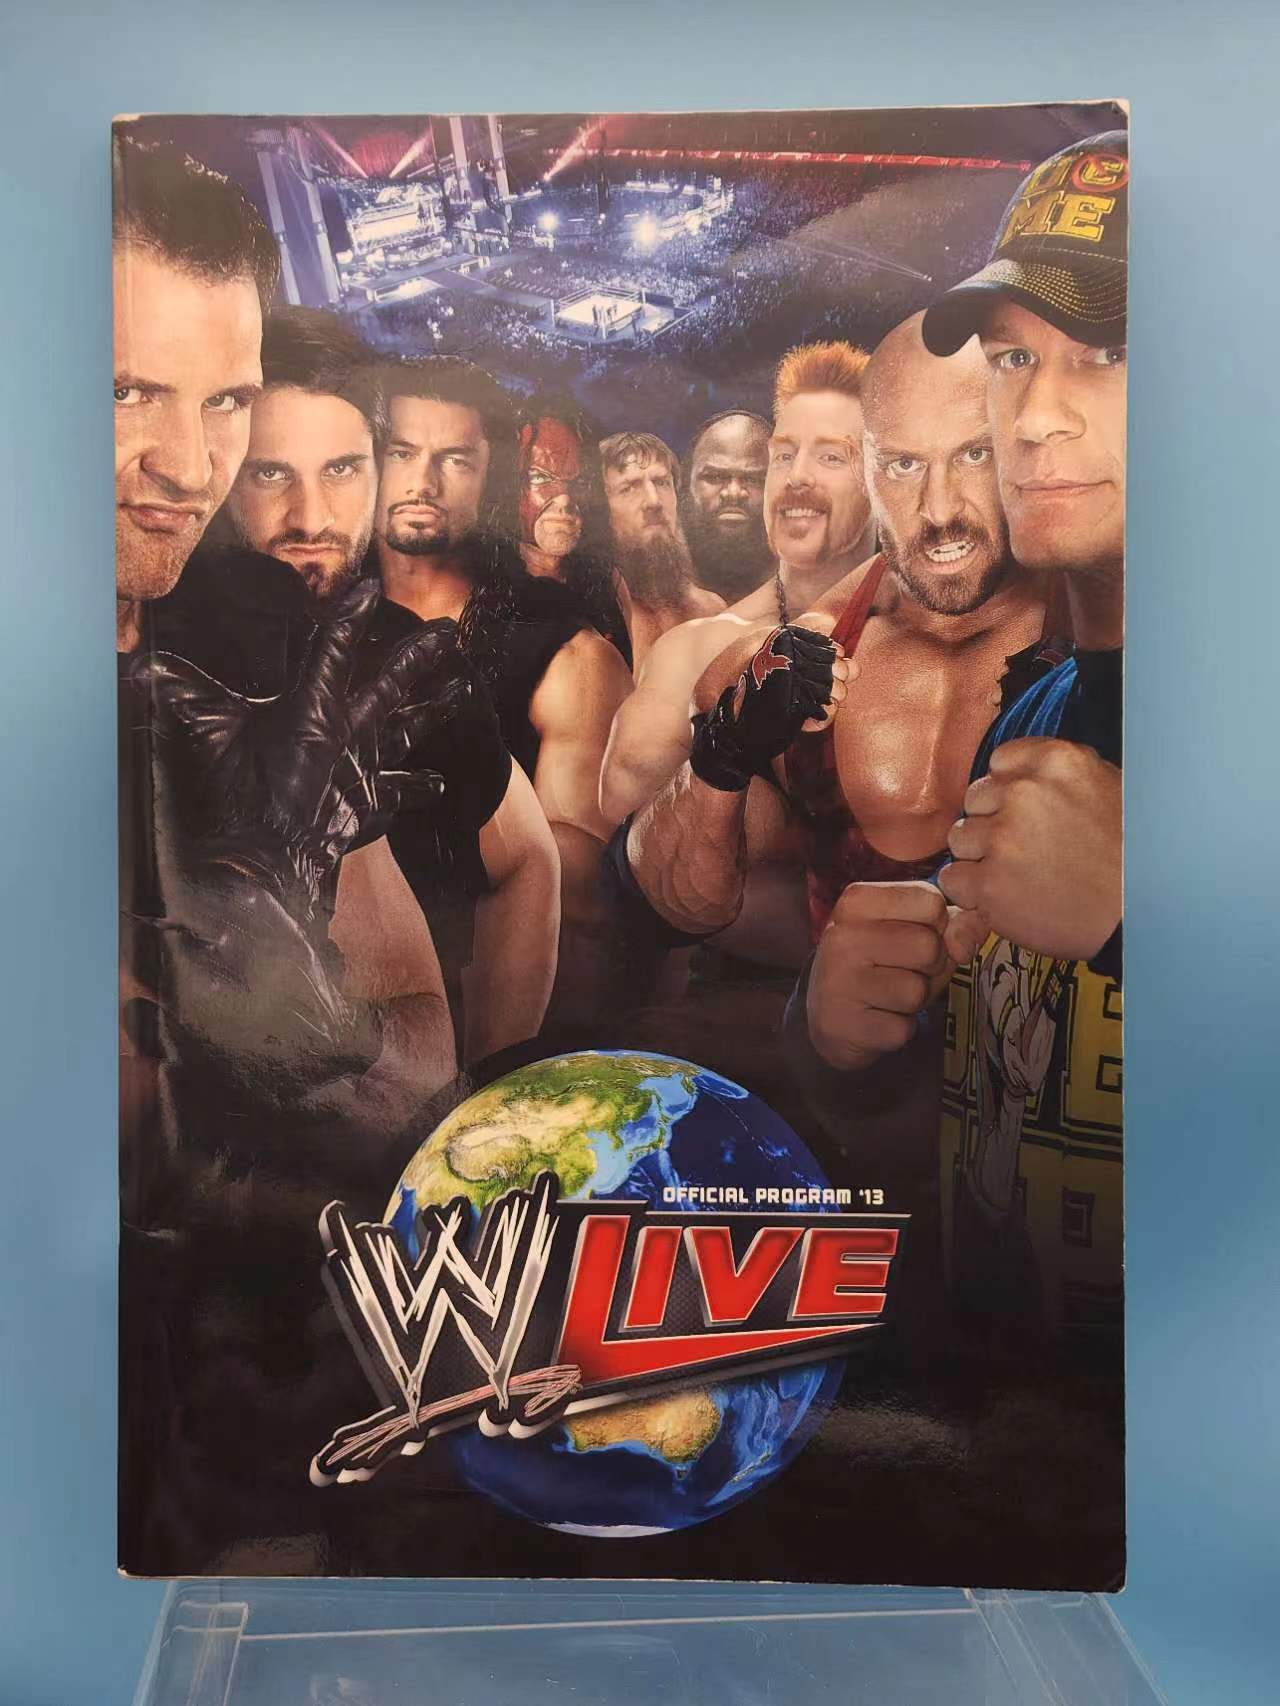 WWE Live Official Program 2013 with 4 autographs